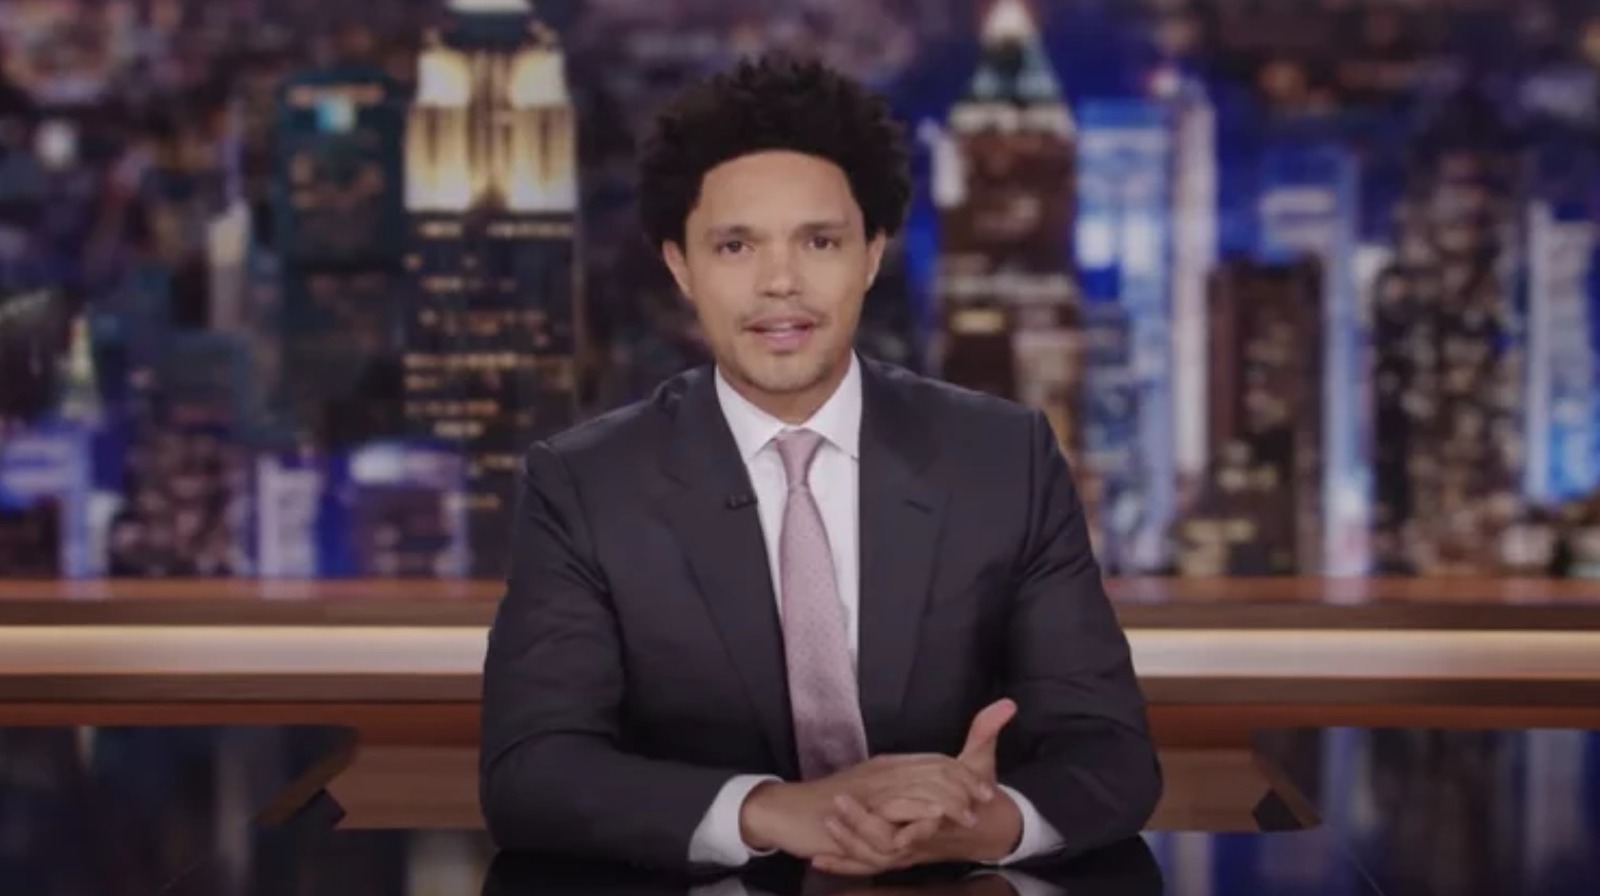 Trevor Noah's Daily Show Exit Was A Complete Surprise To The Crew